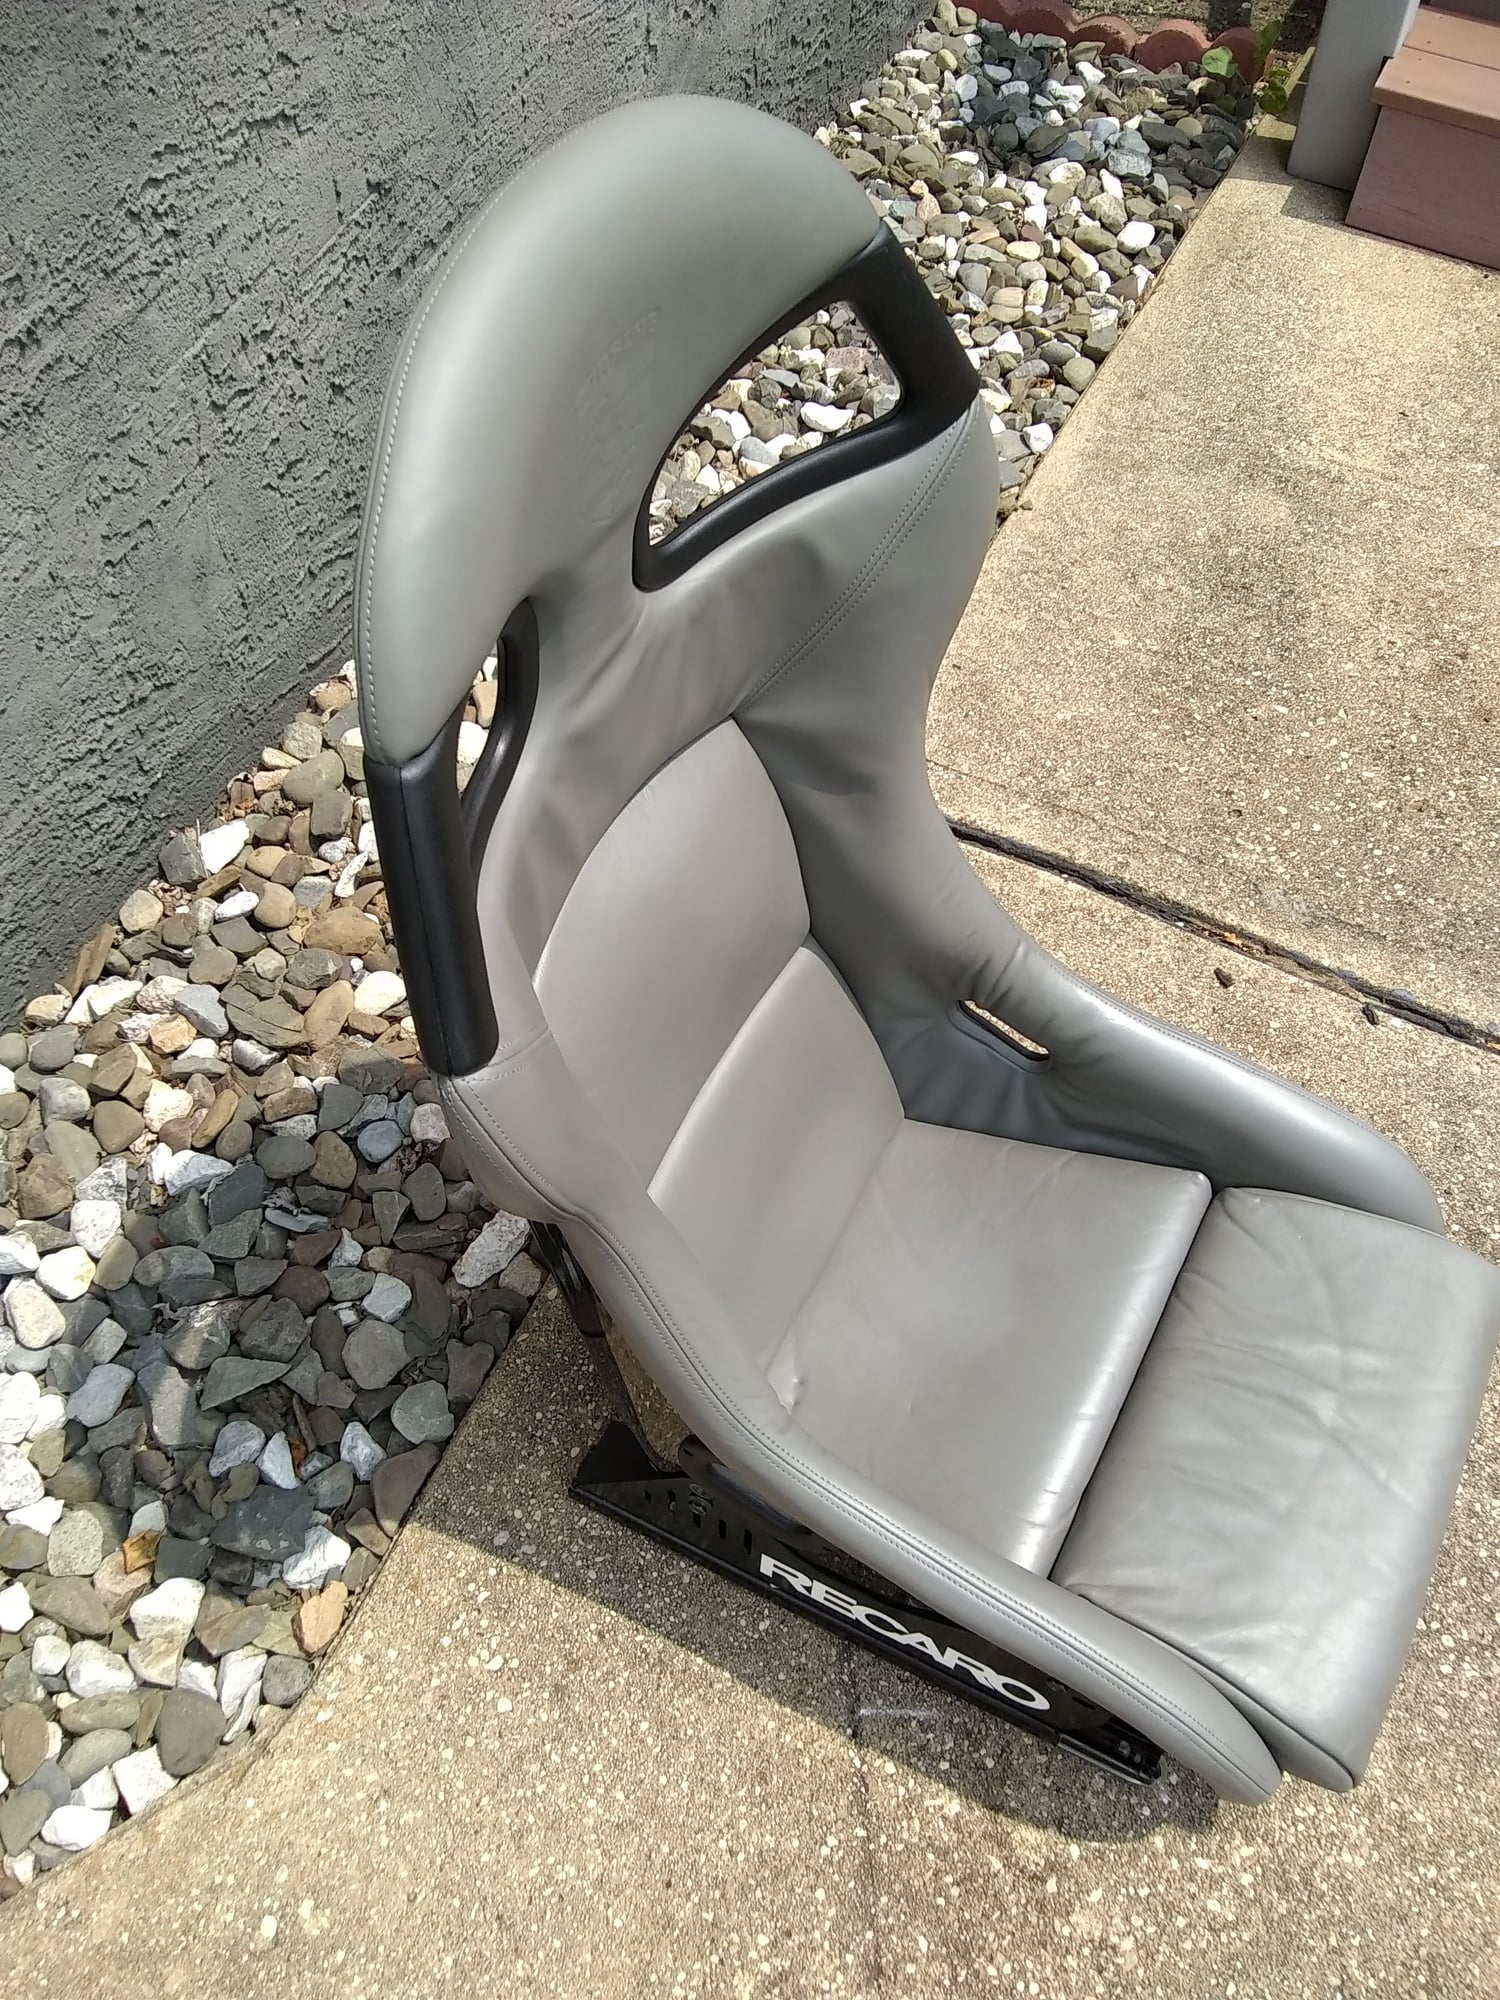 Interior/Upholstery - 996 Euro GT3 Seat - Used - Bellmore, NY 11710, United States